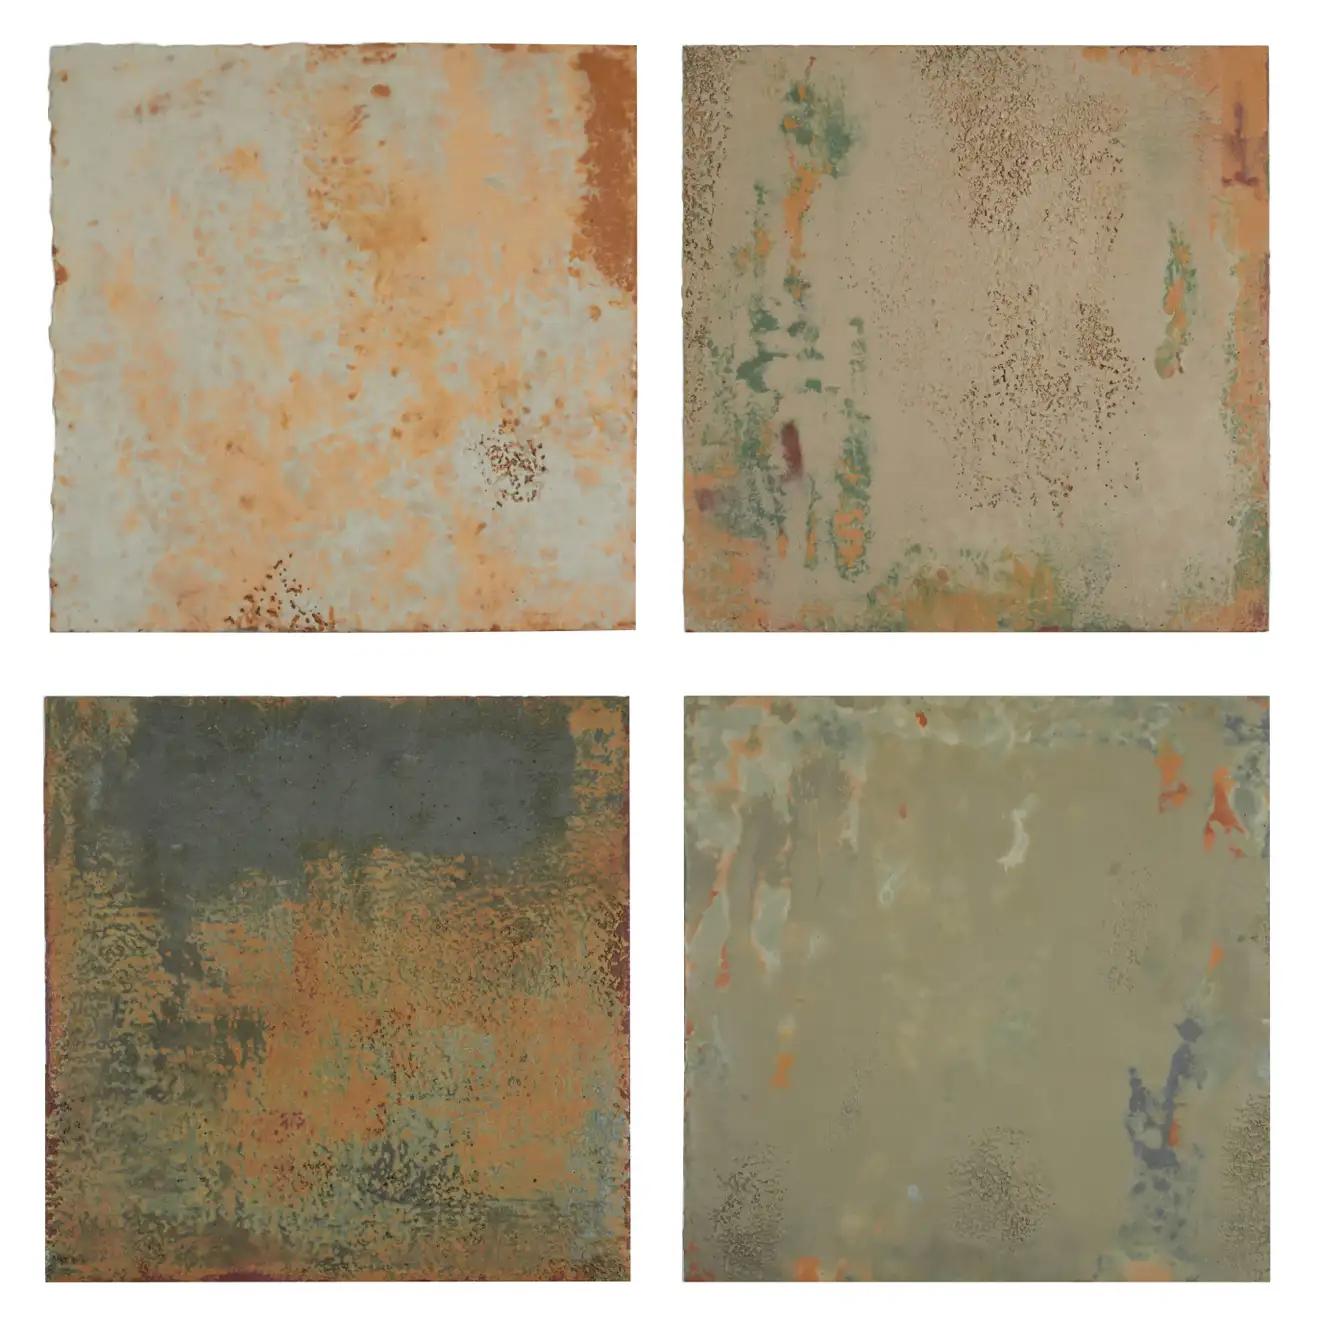 Clay Richard Hirsch Encaustic Painting of Nothing Series, circa 2010 - 2012 For Sale